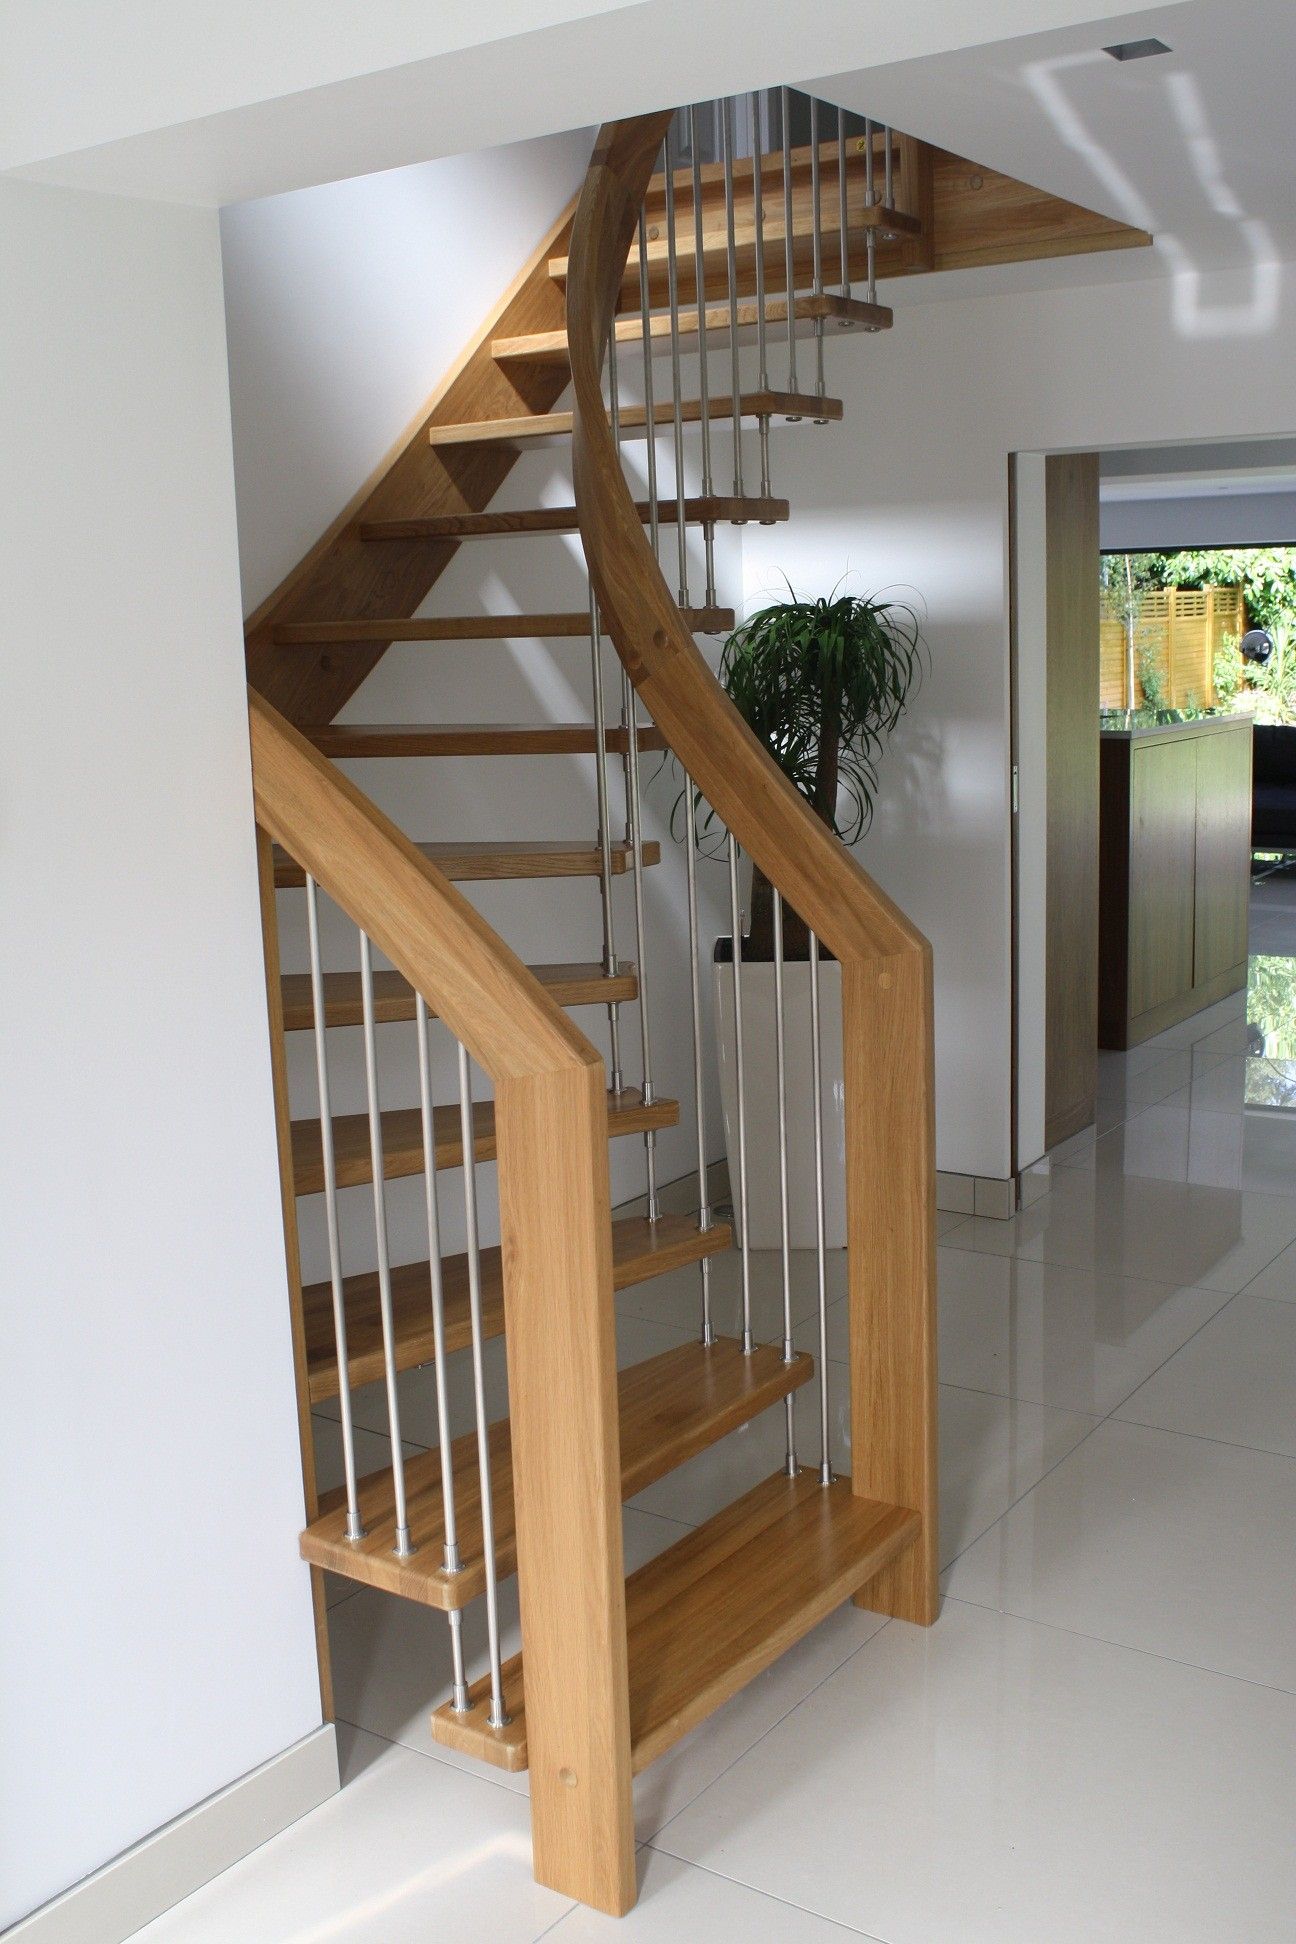 Alluring Design Ideas Of Small Space Staircase With Brown Wooden ...